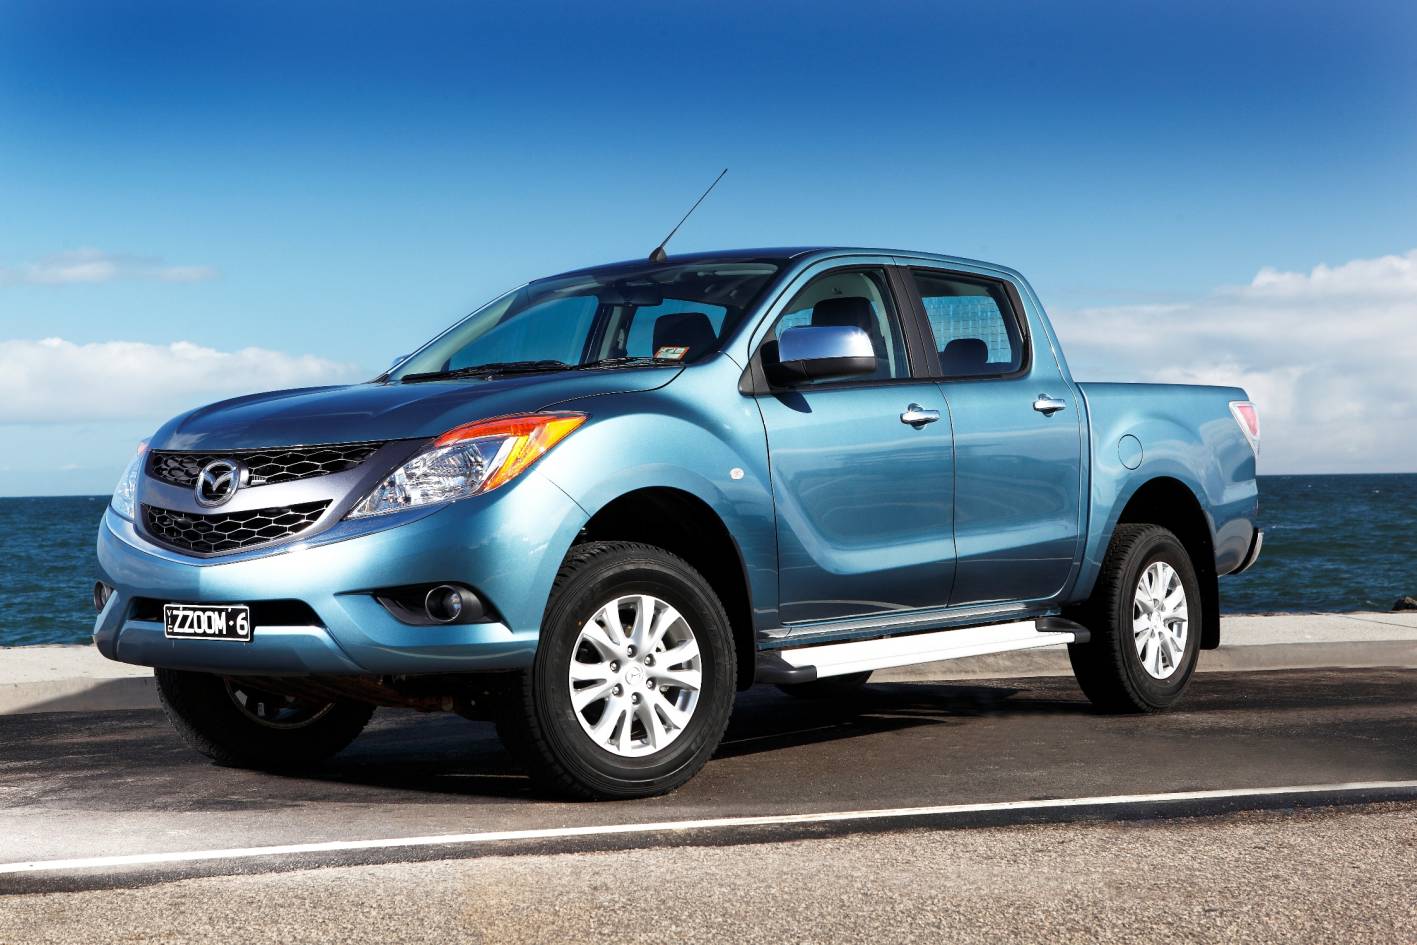 The Mazda BT-50 XTR is the latest 4X4 pickup to squeeze into